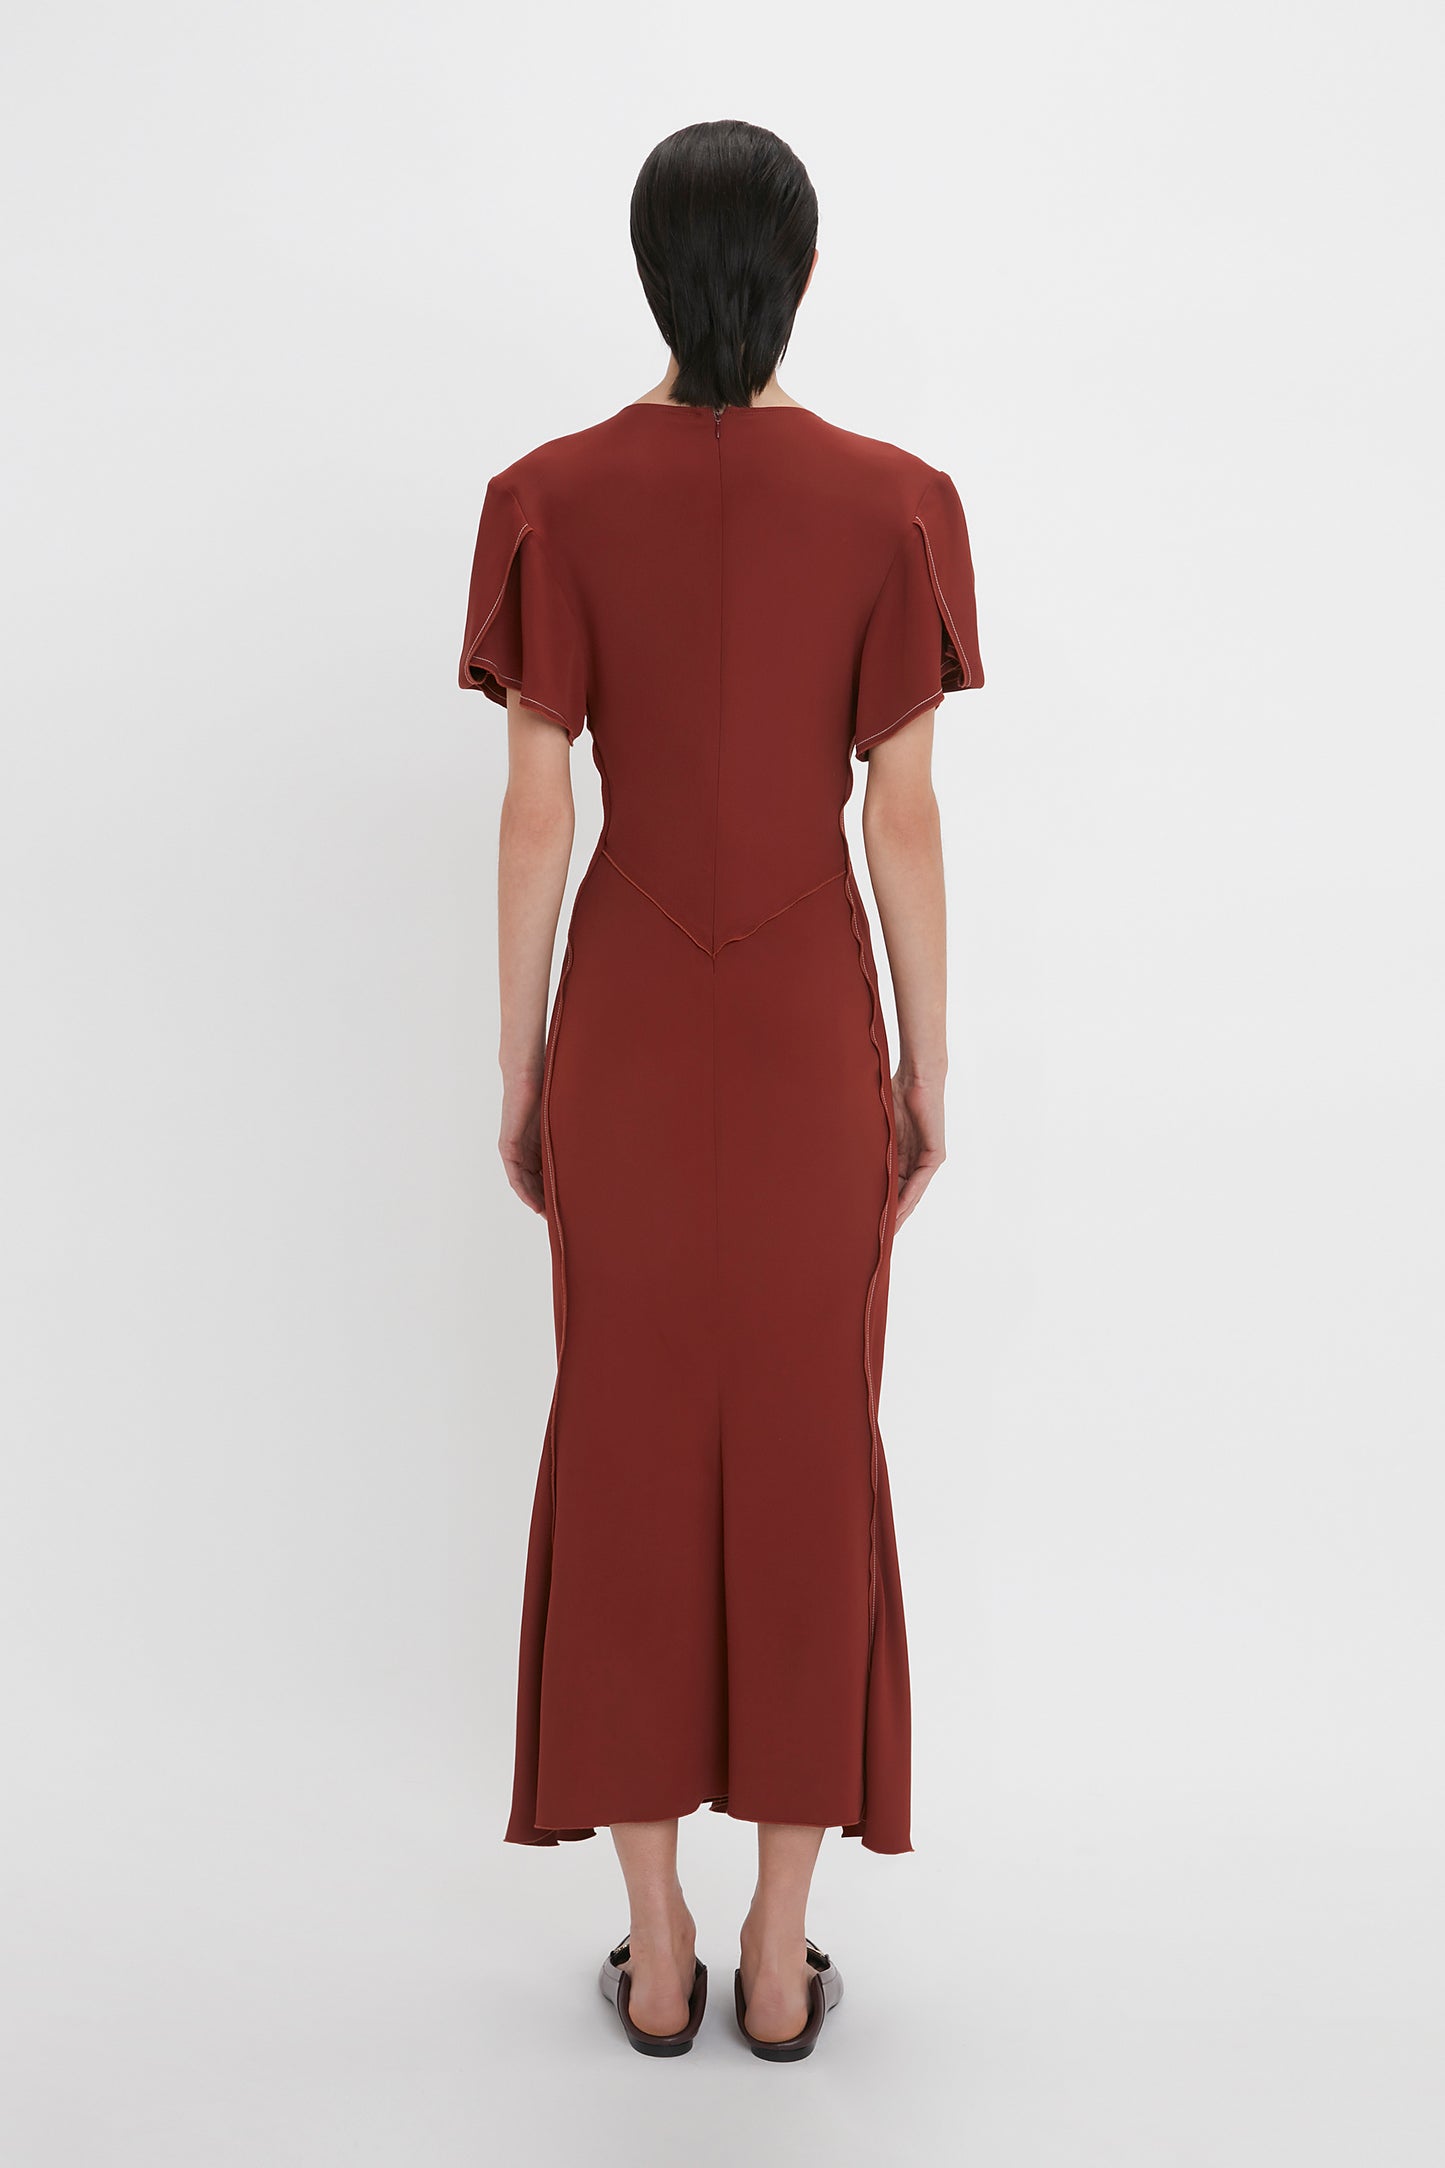 A person with short dark hair is standing facing away from the camera, wearing a Victoria Beckham Gathered V-Neck Midi Dress In Russet and dark flat shoes.